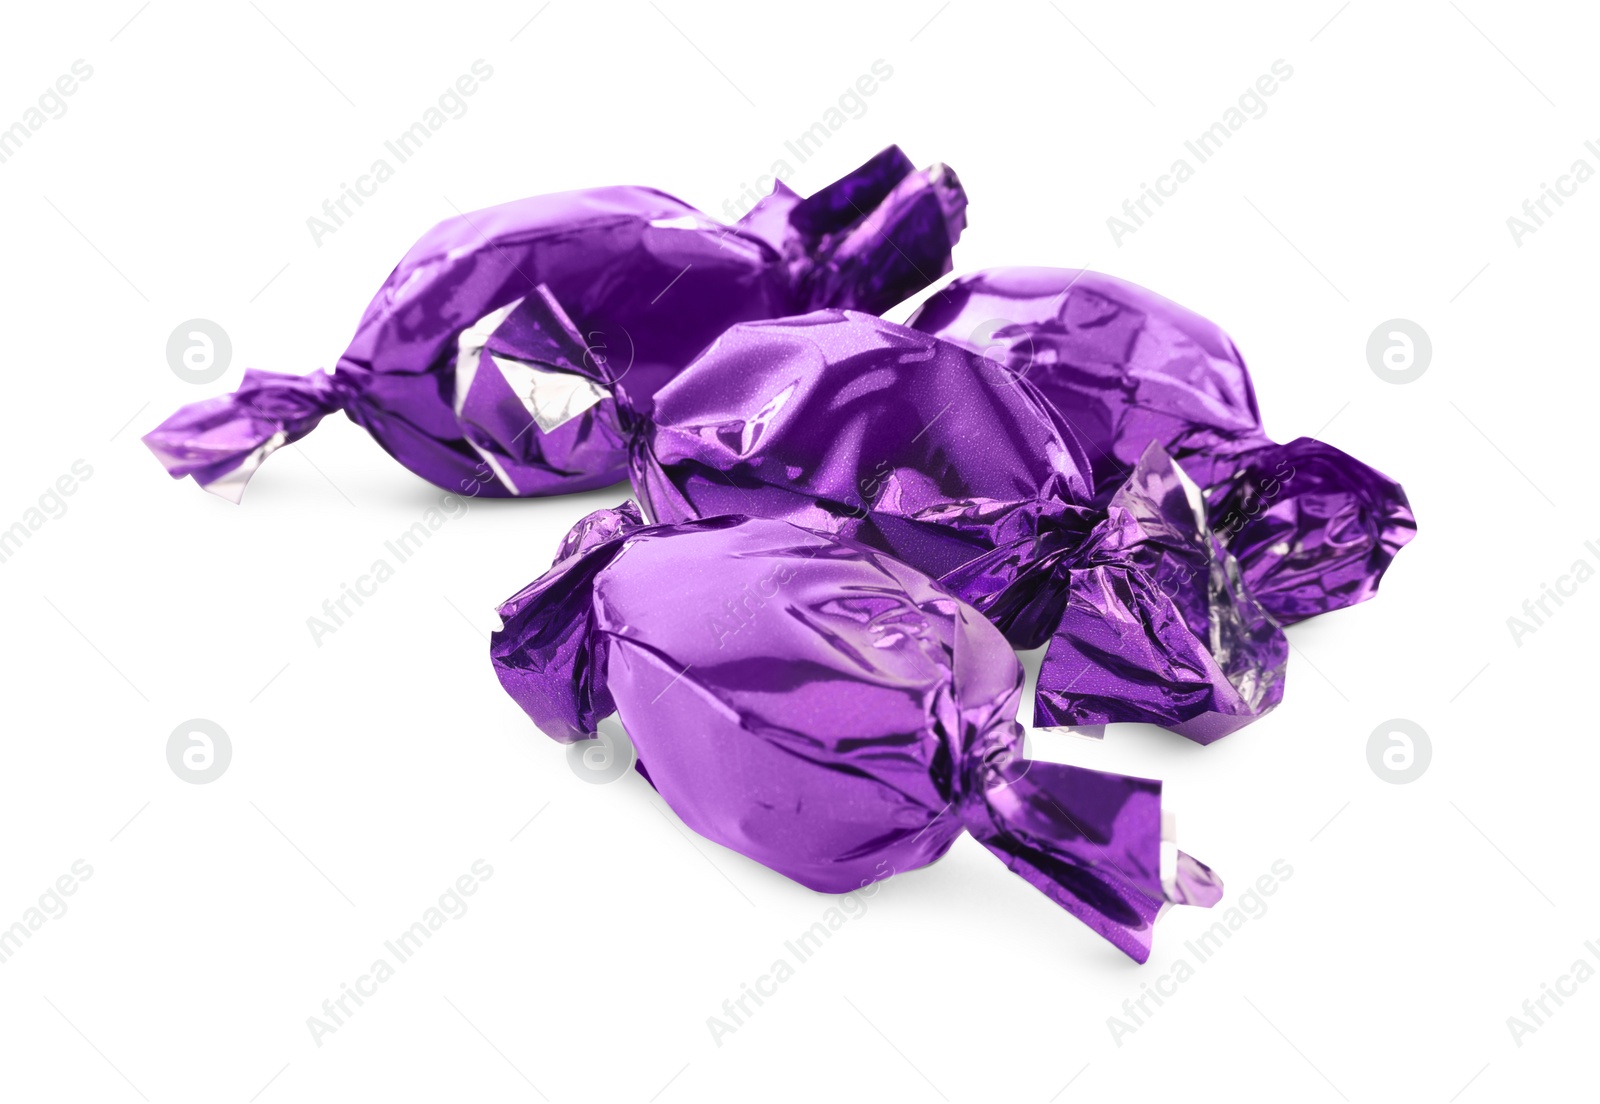 Photo of Candies in purple wrappers isolated on white